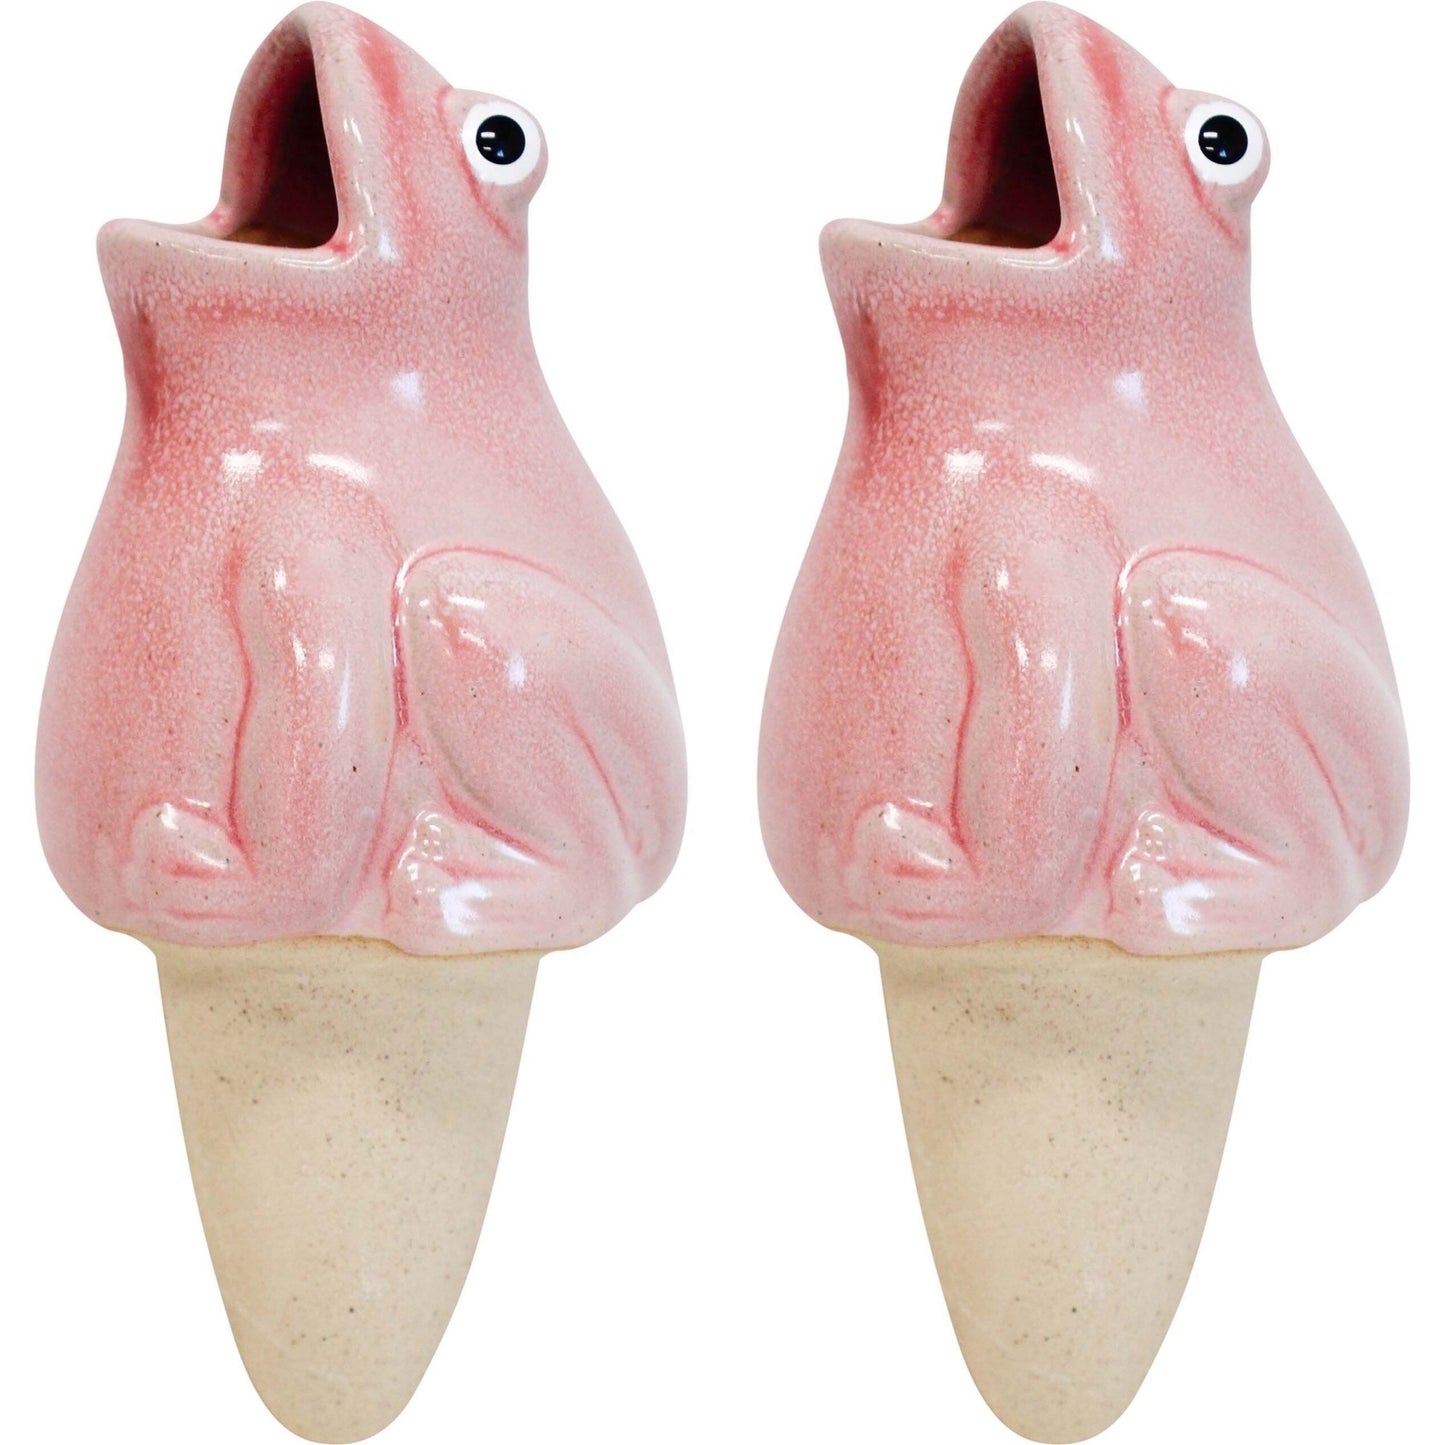 Water Spike Frog Pink Set of 2 - The Renmy Store Homewares & Gifts 